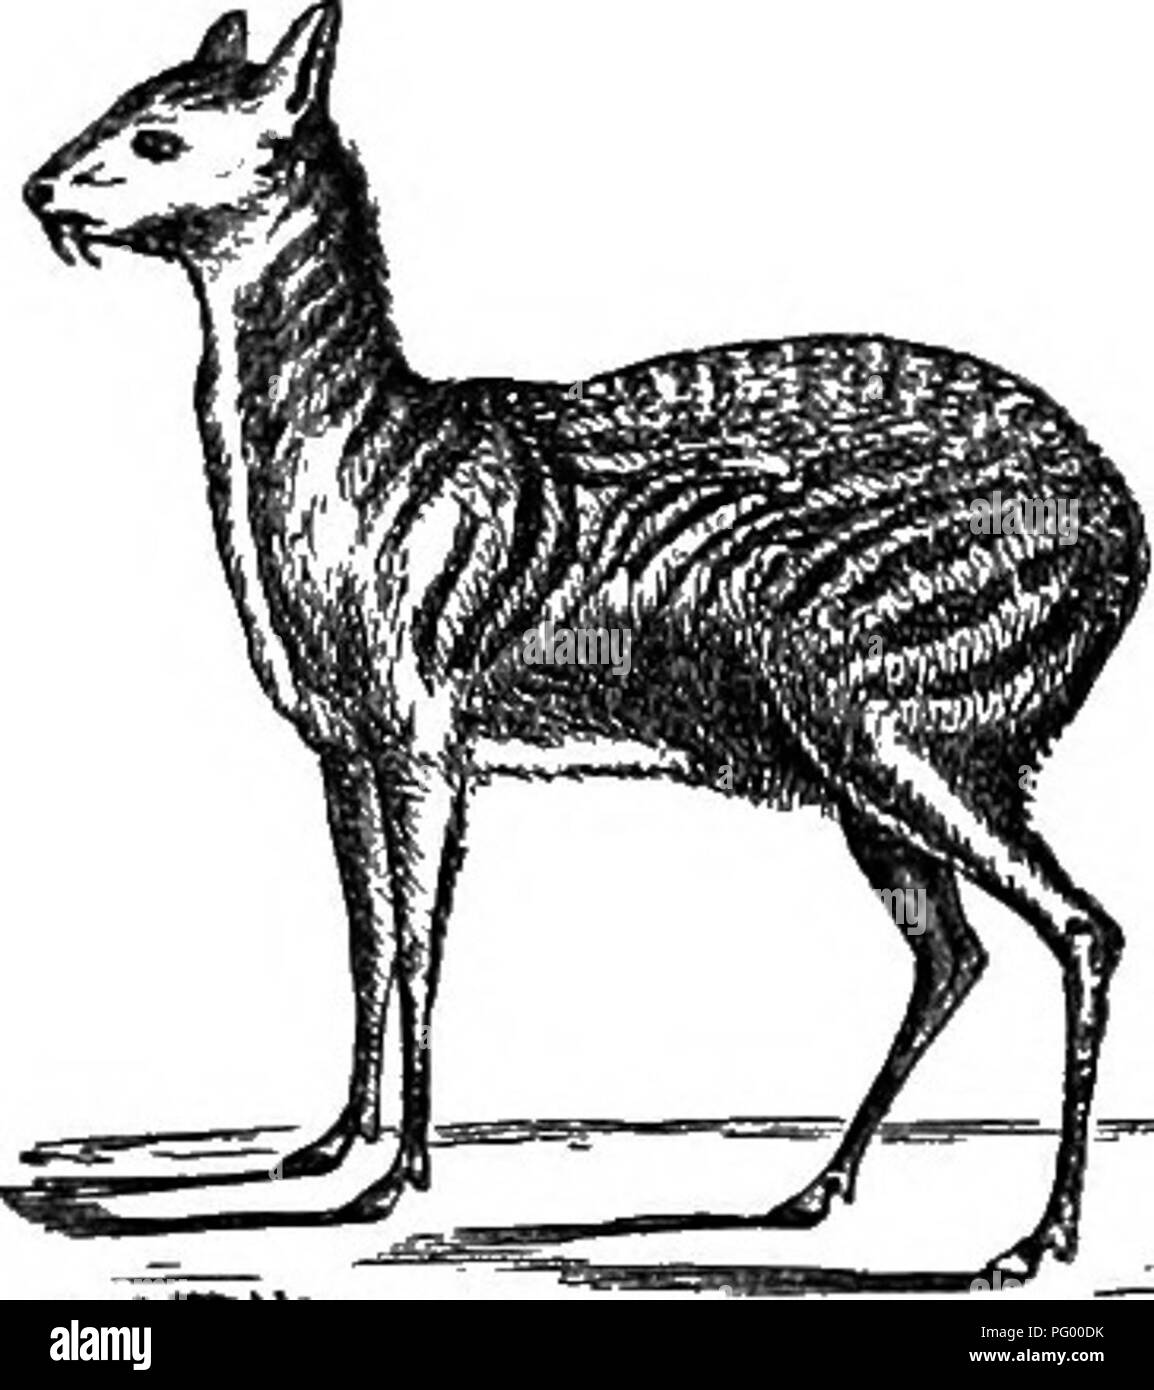 . Natural history of animals. Containing brief descriptions of the animals figured on Tenney's Natural history tablets, but complete without the tablets. Zoology. Fig. 60. — Common or Virginia Deer. The Musk Deer inhabits Thi- bet, and is smaller than the Common Deer, and has no horns. In each side of the upper jaw are long canine or eye teeth, like tusks. The musk used in making perfum- ery is furnished by this animal. It is contained in a pouch, or sack, on the under side of the body. ANTELOPES. Antelopes are found in Europe, Asia, Africa, and North America, but are most numerous in Southern Stock Photo